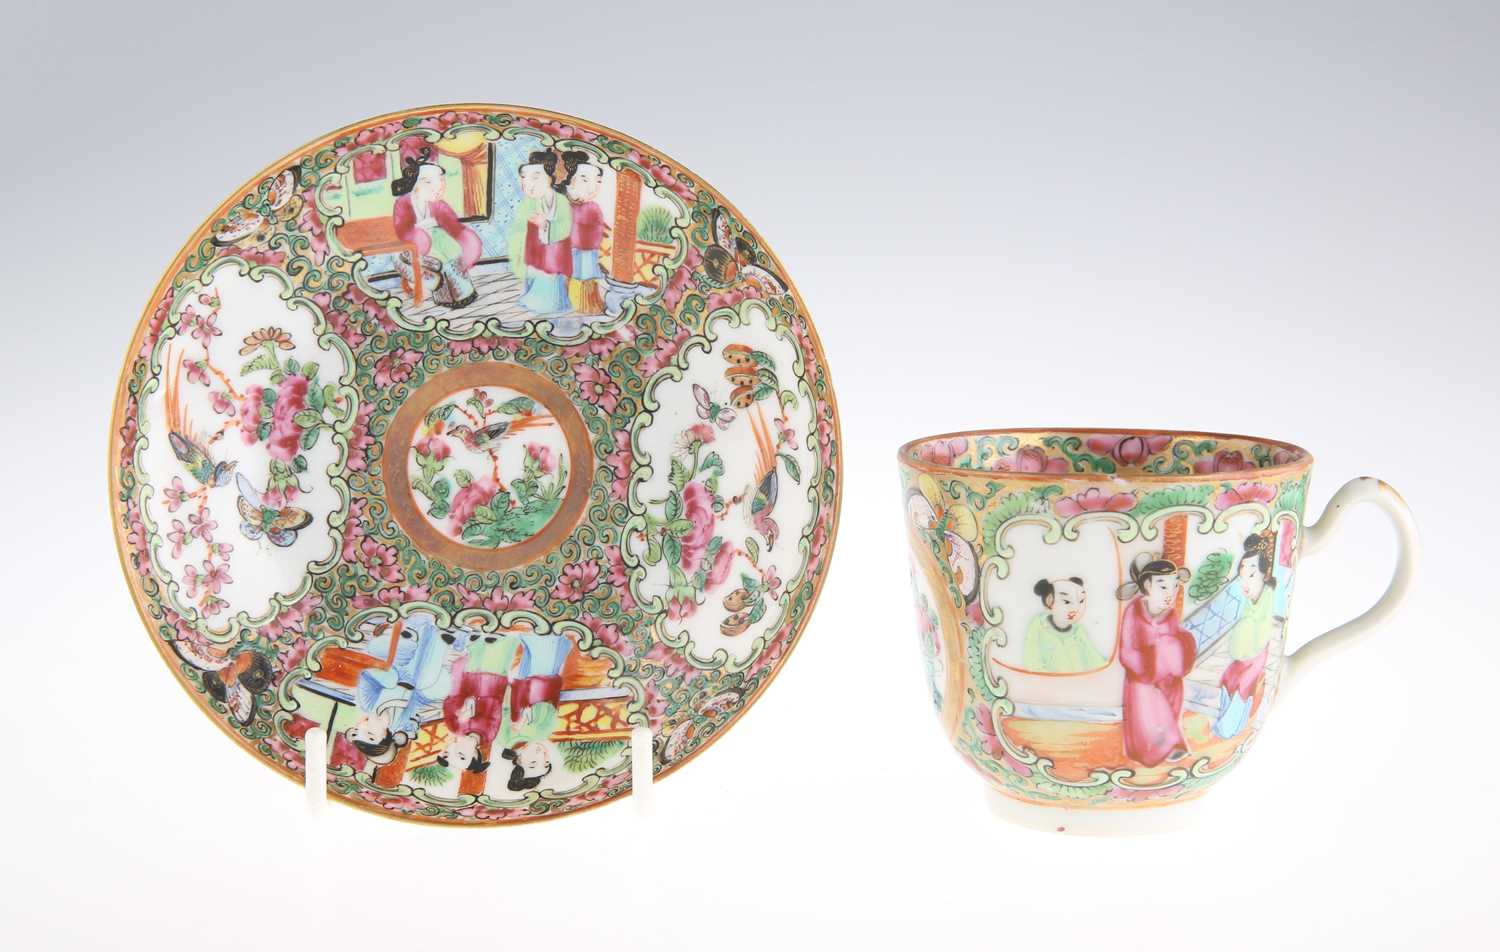 A 19TH CENTURY CHINESE FAMILLE ROSE CUP AND SAUCER - Image 4 of 6